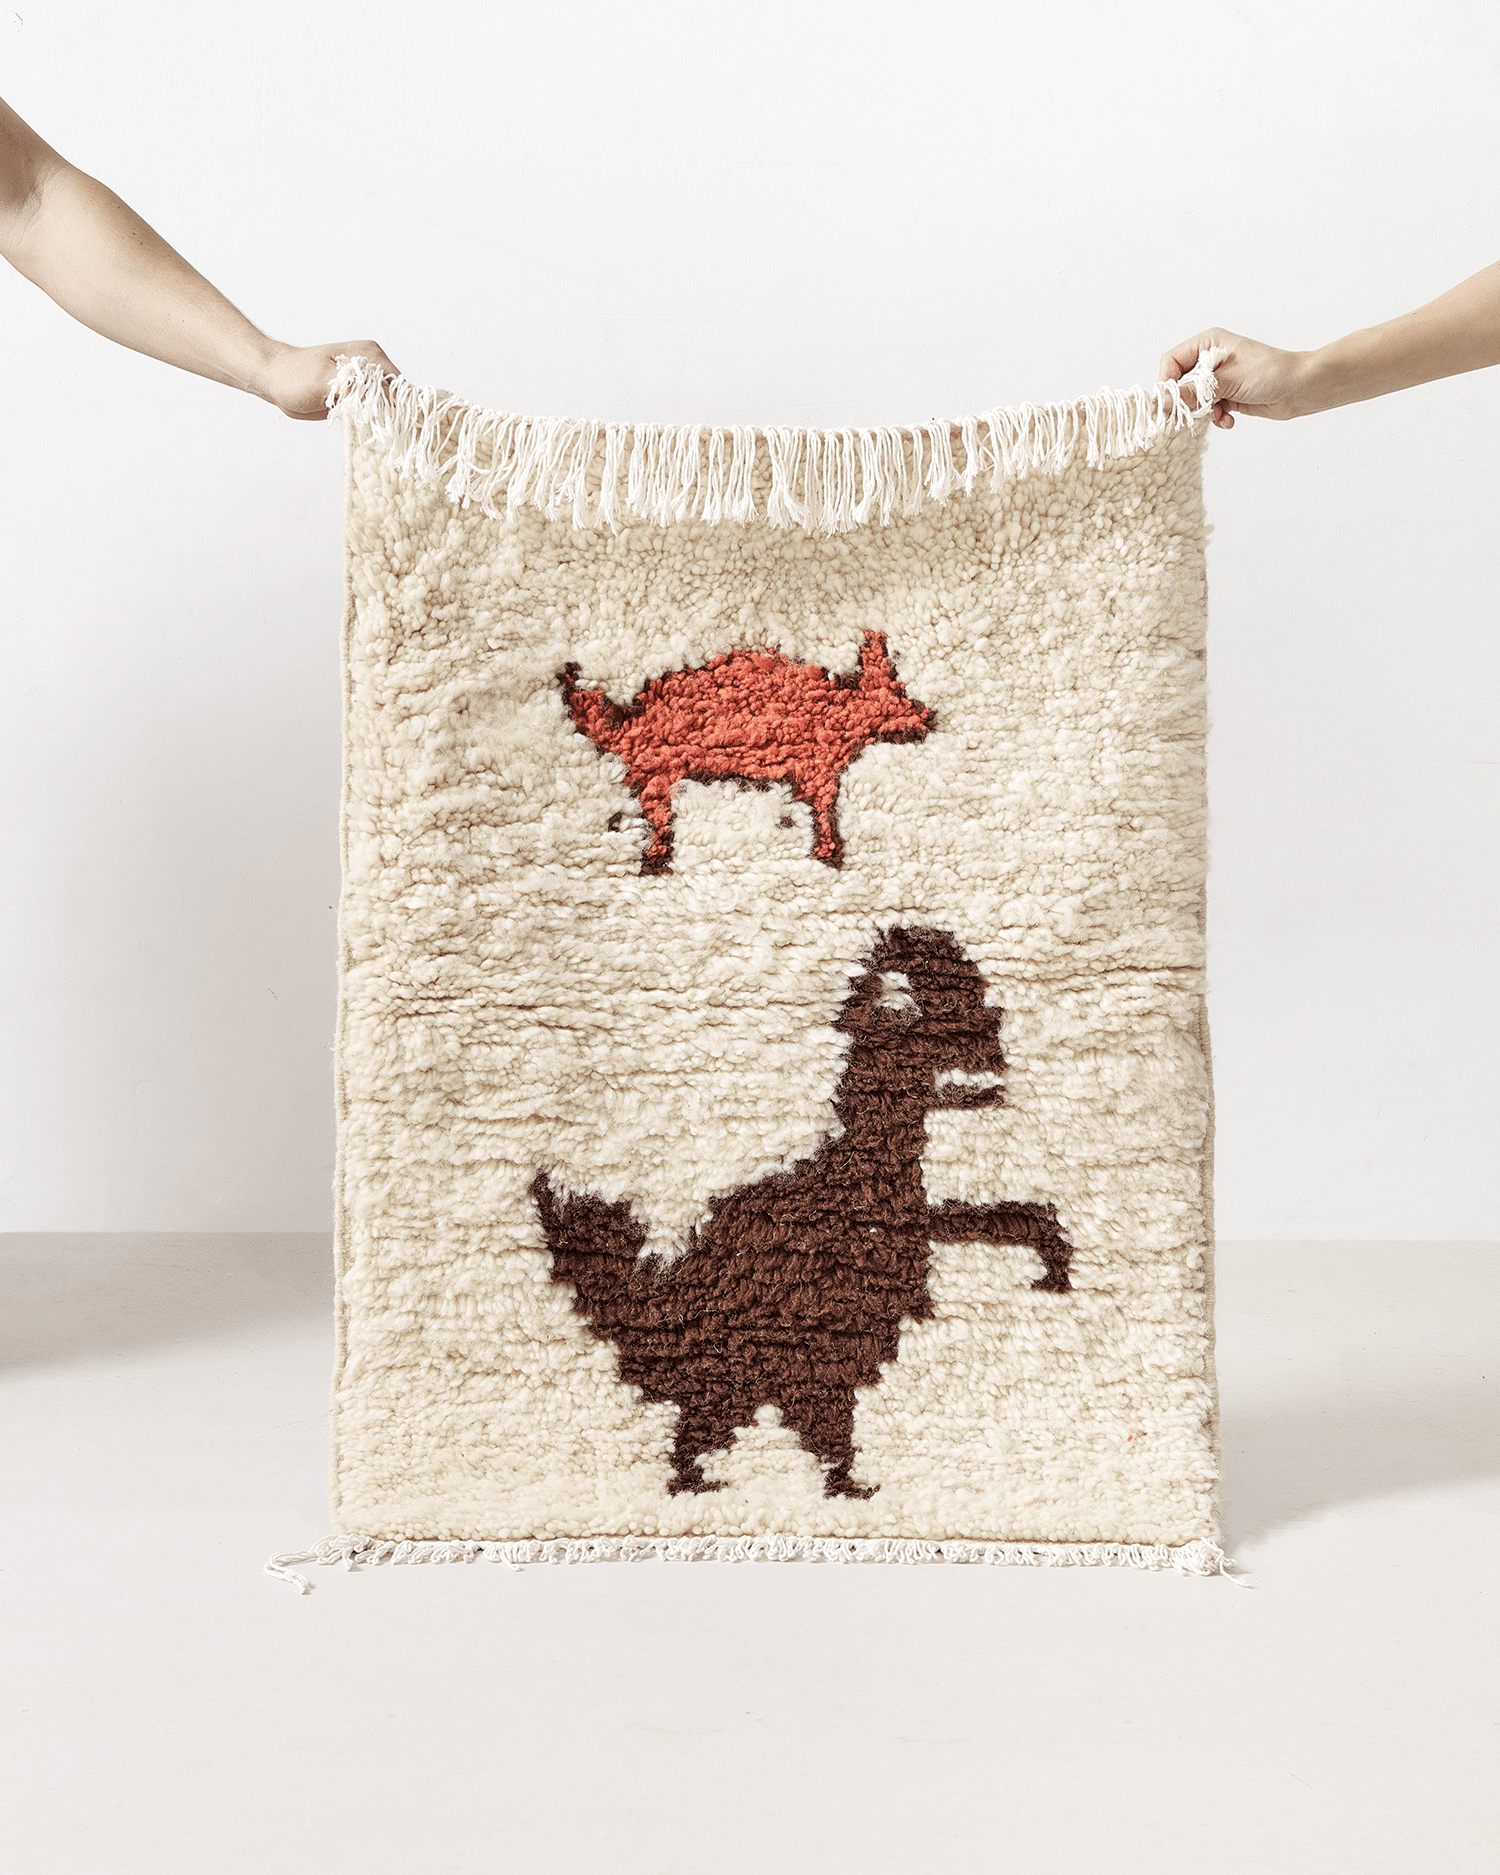 Tiny rug with a T-rex